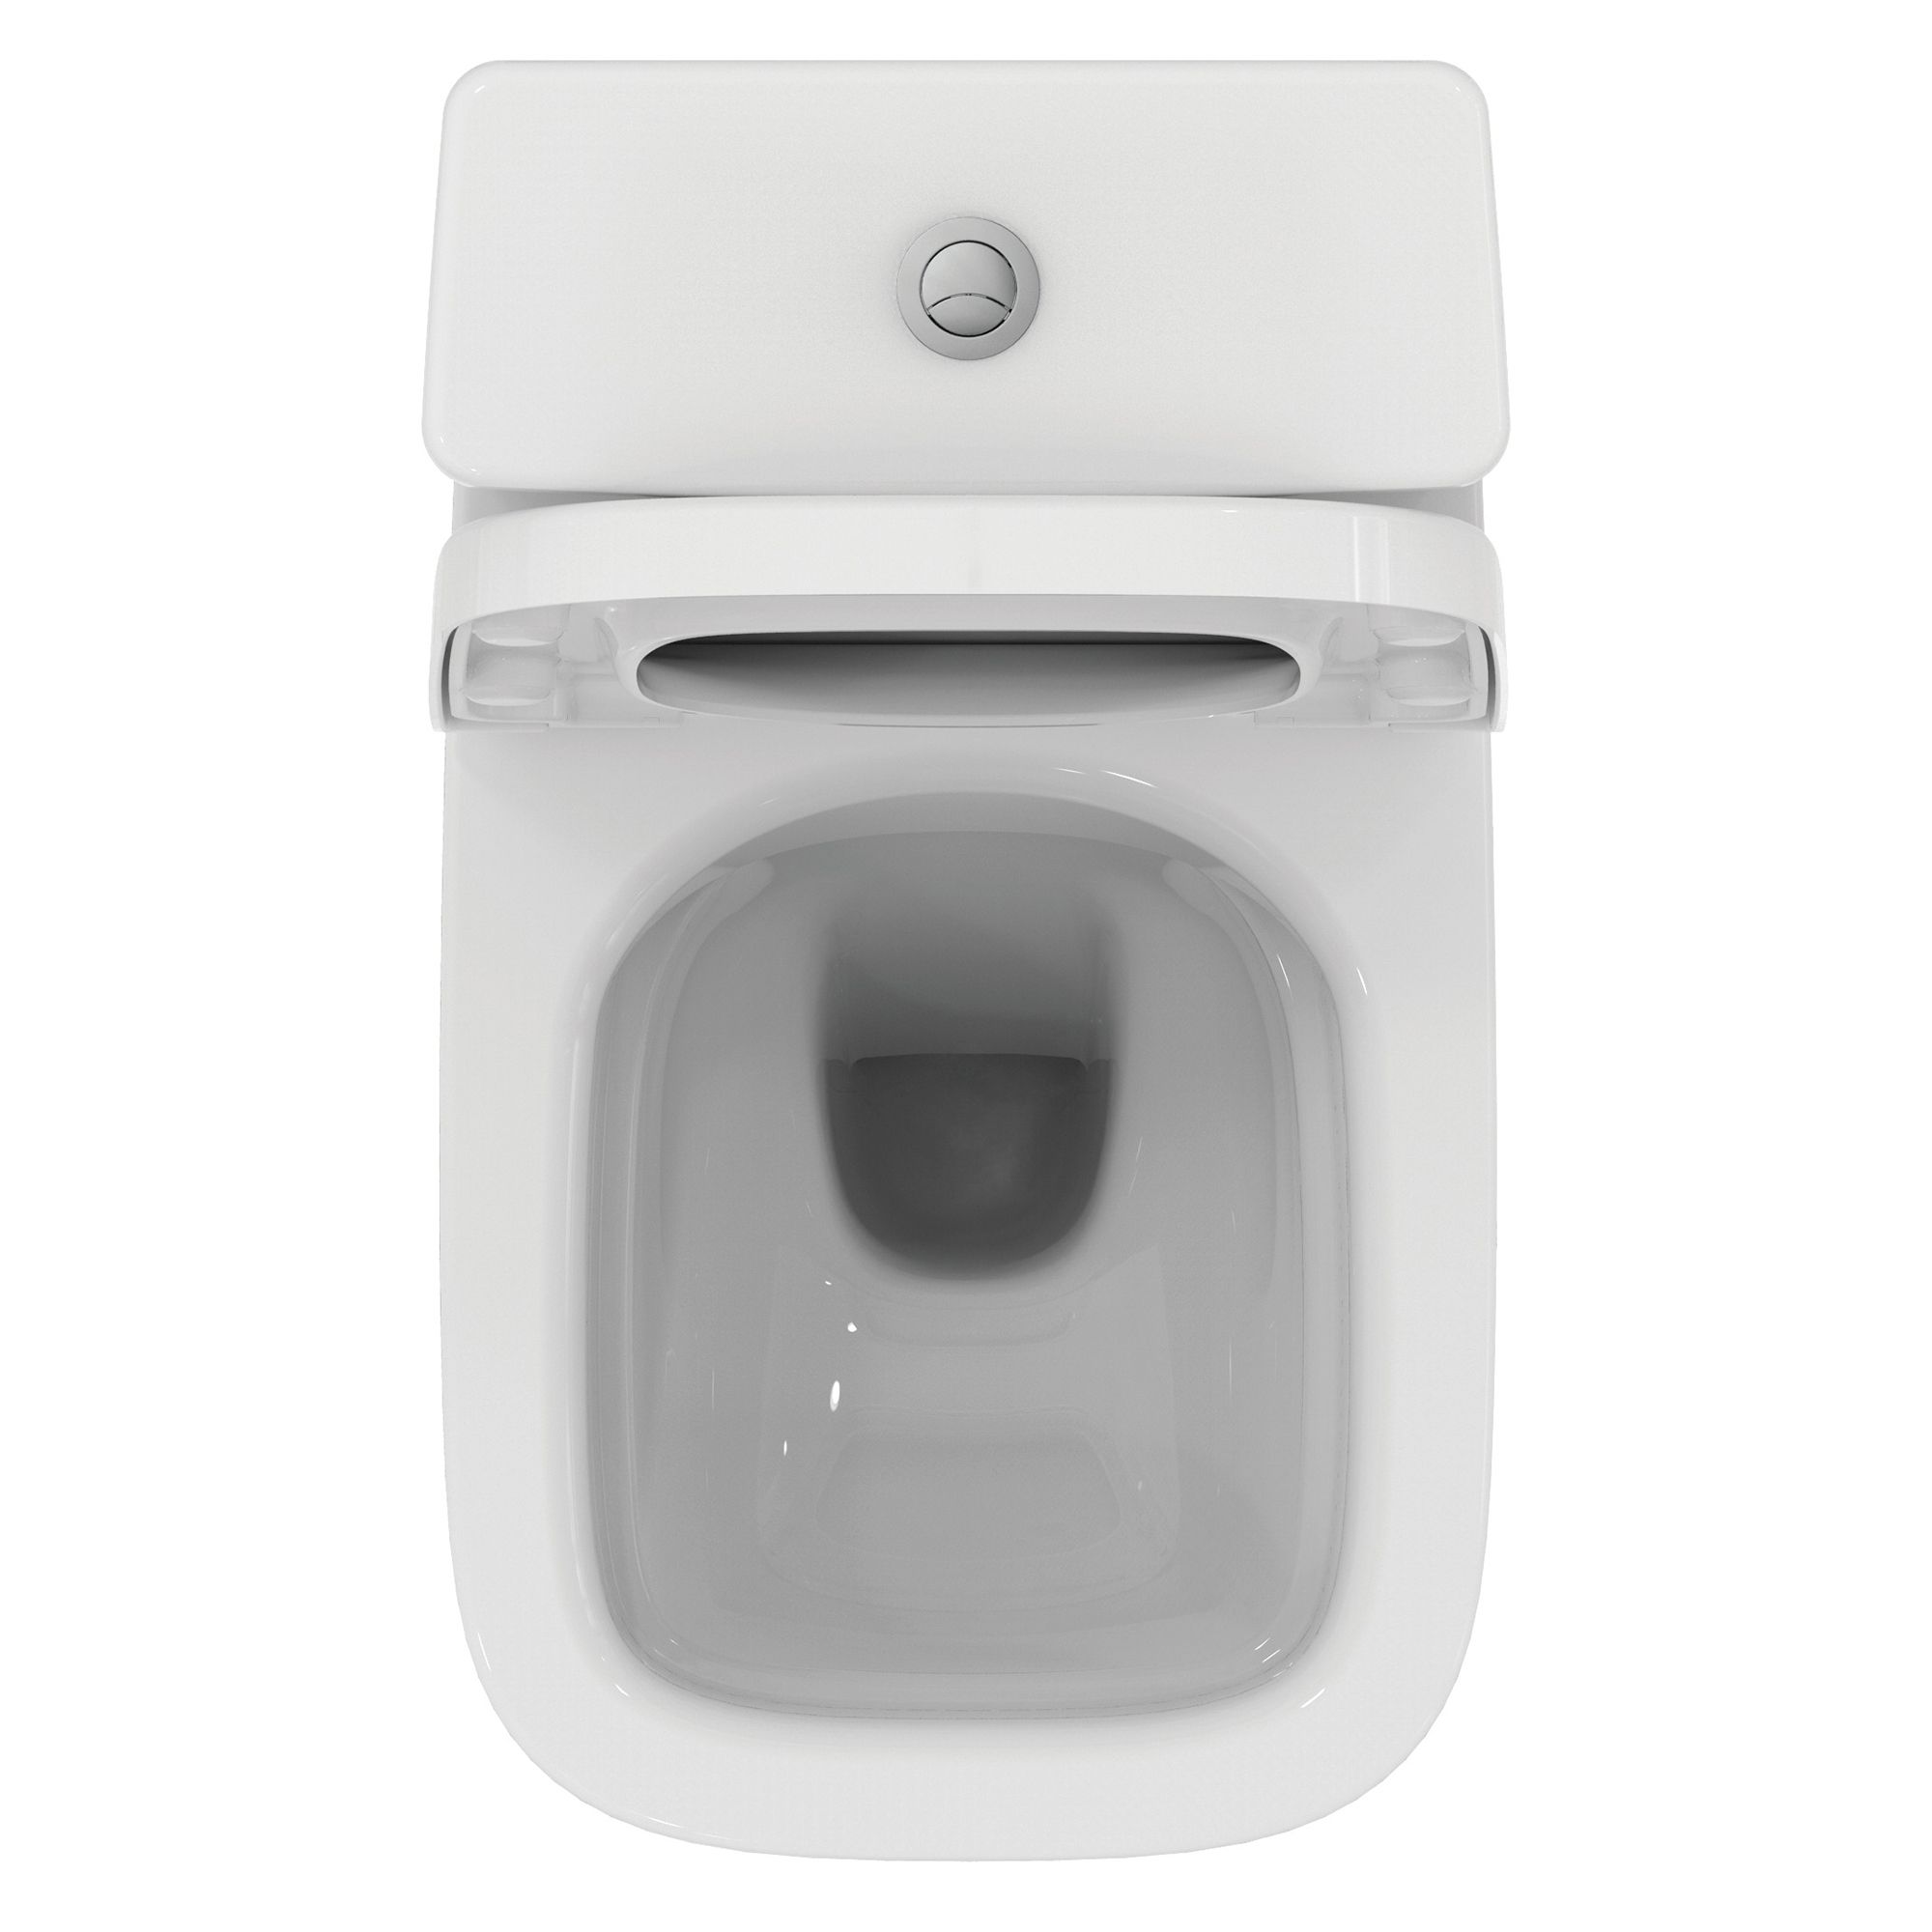 Ideal Standard i.life A White Standard Back to wall Square Close coupled Toilet set with Soft close seat